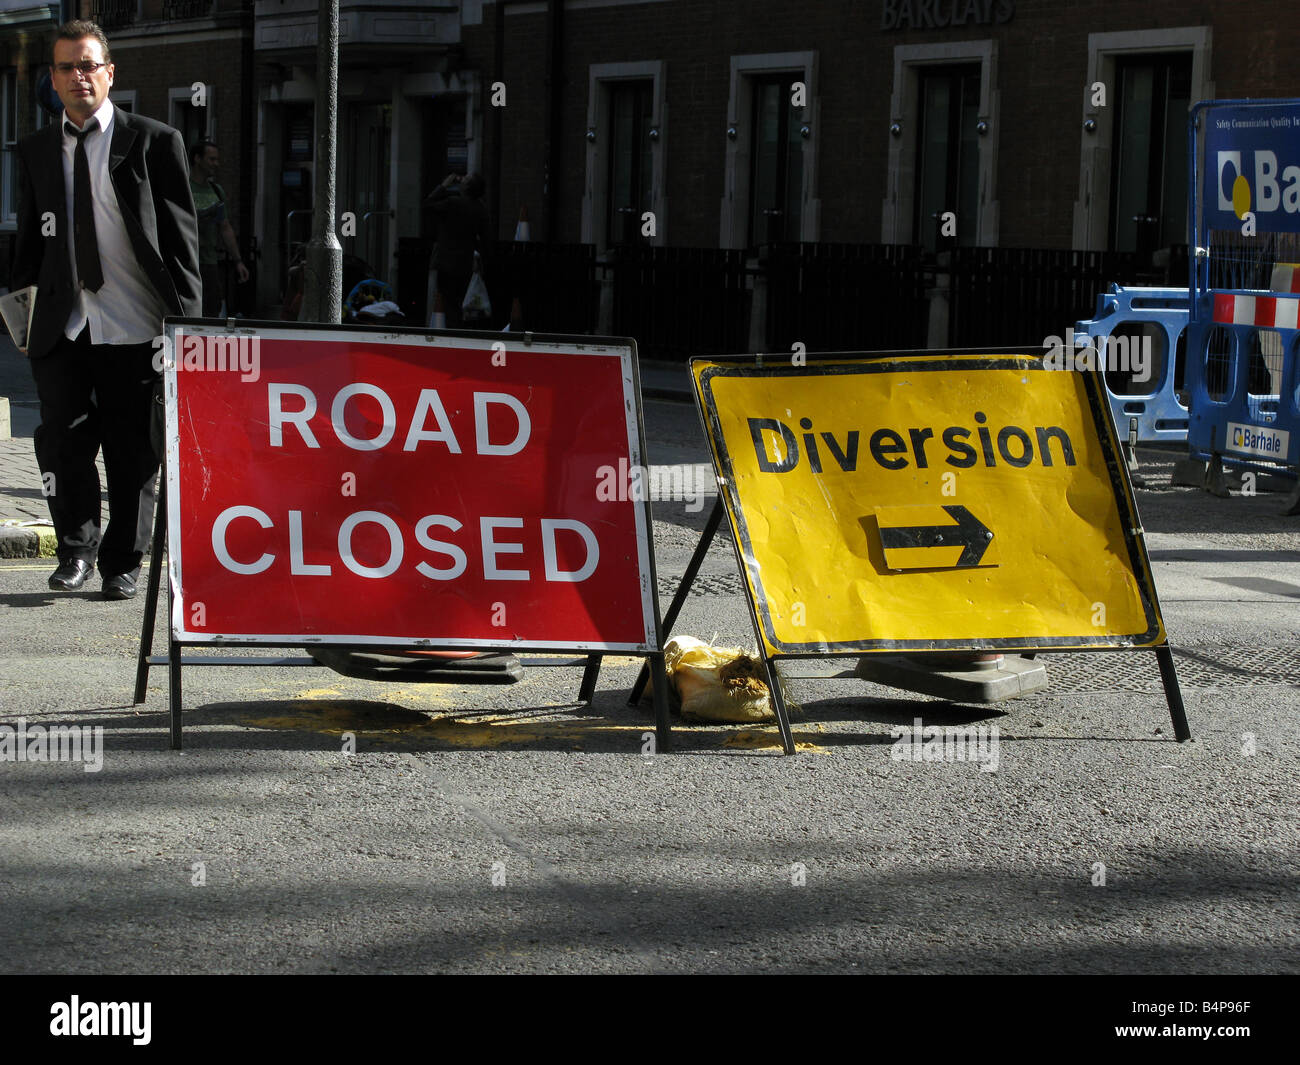 Road closed and Diversion sign in London Soho Stock Photo